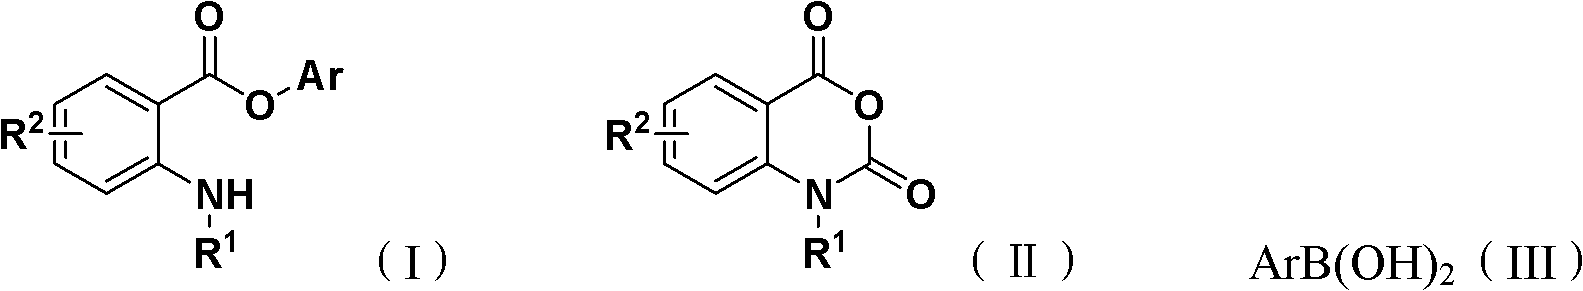 Synthesis method for ortho amino aromatic formic acid aryl ester derivatives